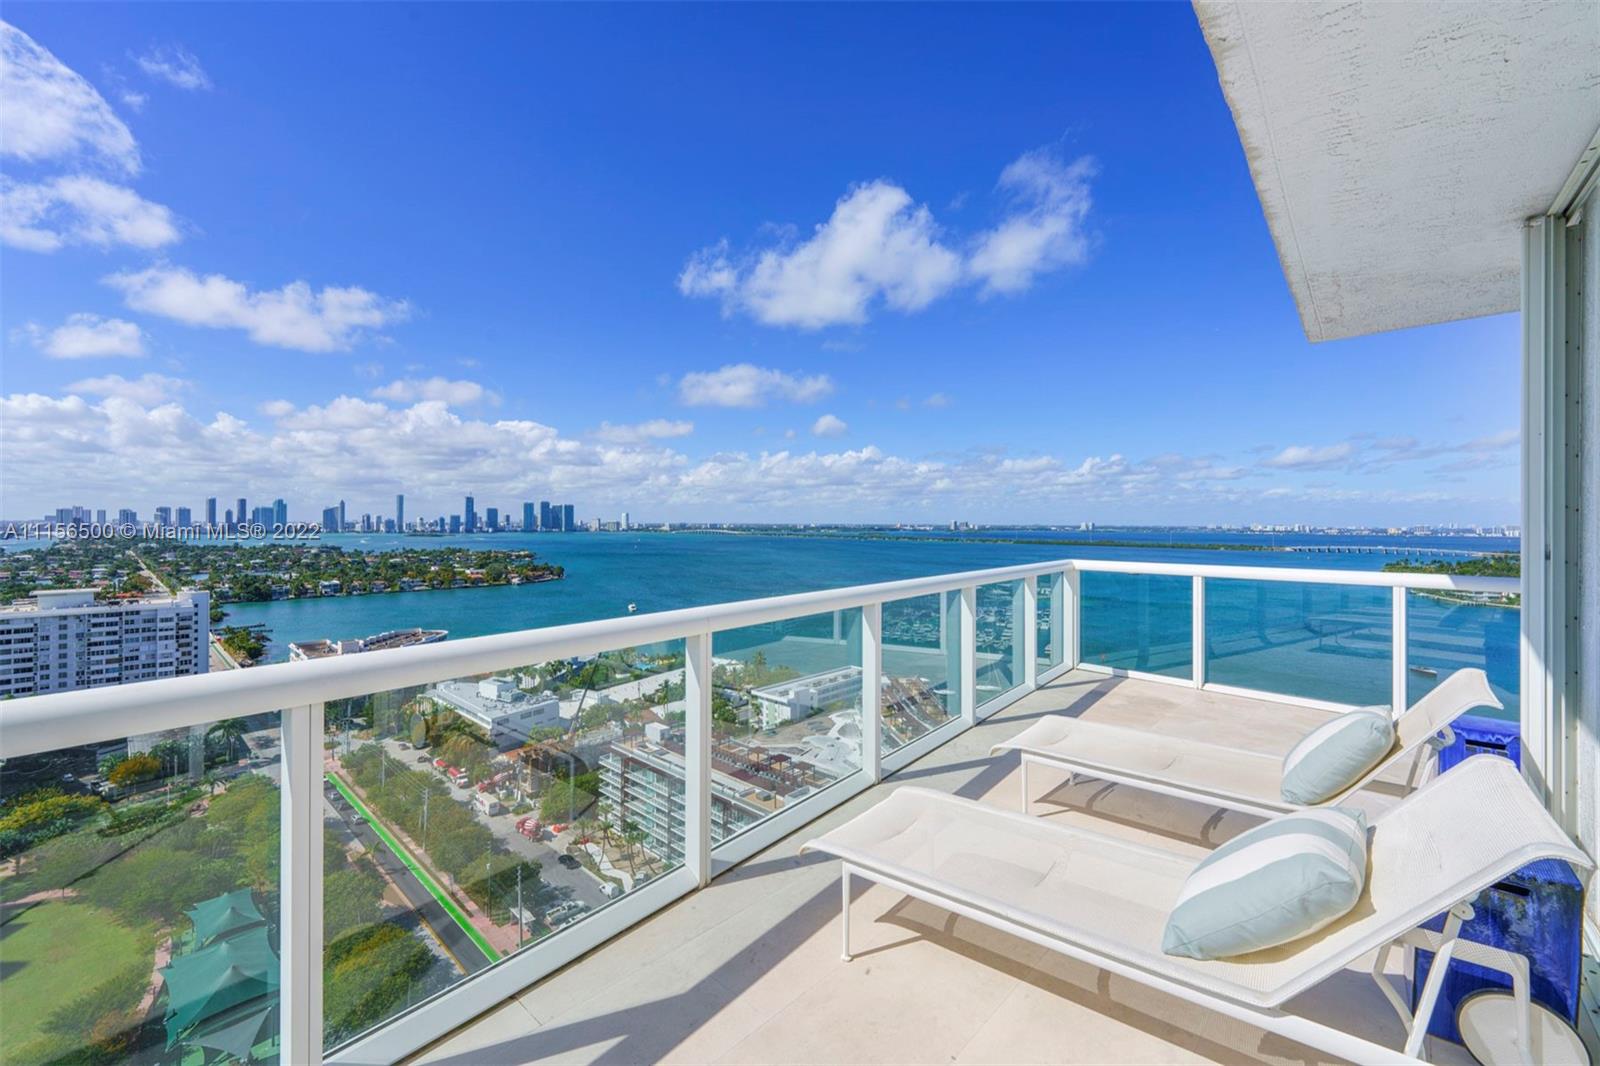 Miami stretches out before you from this one-of-a-kind PH Duplex on coveted Belle Isle. Sweeping views of Biscayne Bay, Miami skyline & the ocean surround this 3 BD,2.5 BA 4,750 SF home. Enjoy the 360-degree views from the warm, inviting interior or on 1 of the 2 oversized, wraparound balconies. Principal bdrm on main floor boasts 22’ ceilings, spa bath w/Sedona marble countertops & ebonized-maple cabinetry. Sliding glass separates the tub & sauna, where cream & beige river rock flooring & Majorca limestone incorporate elements of nature for a relaxing spa experience. Open gourmet kitchen features dark wood cabinetry by Snaidero, Miele & SubZero appliances & Calcutta gold marble center island & countertops. Upstairs a large office, media room & 2 guest bd’s complete this Miami Beach dream